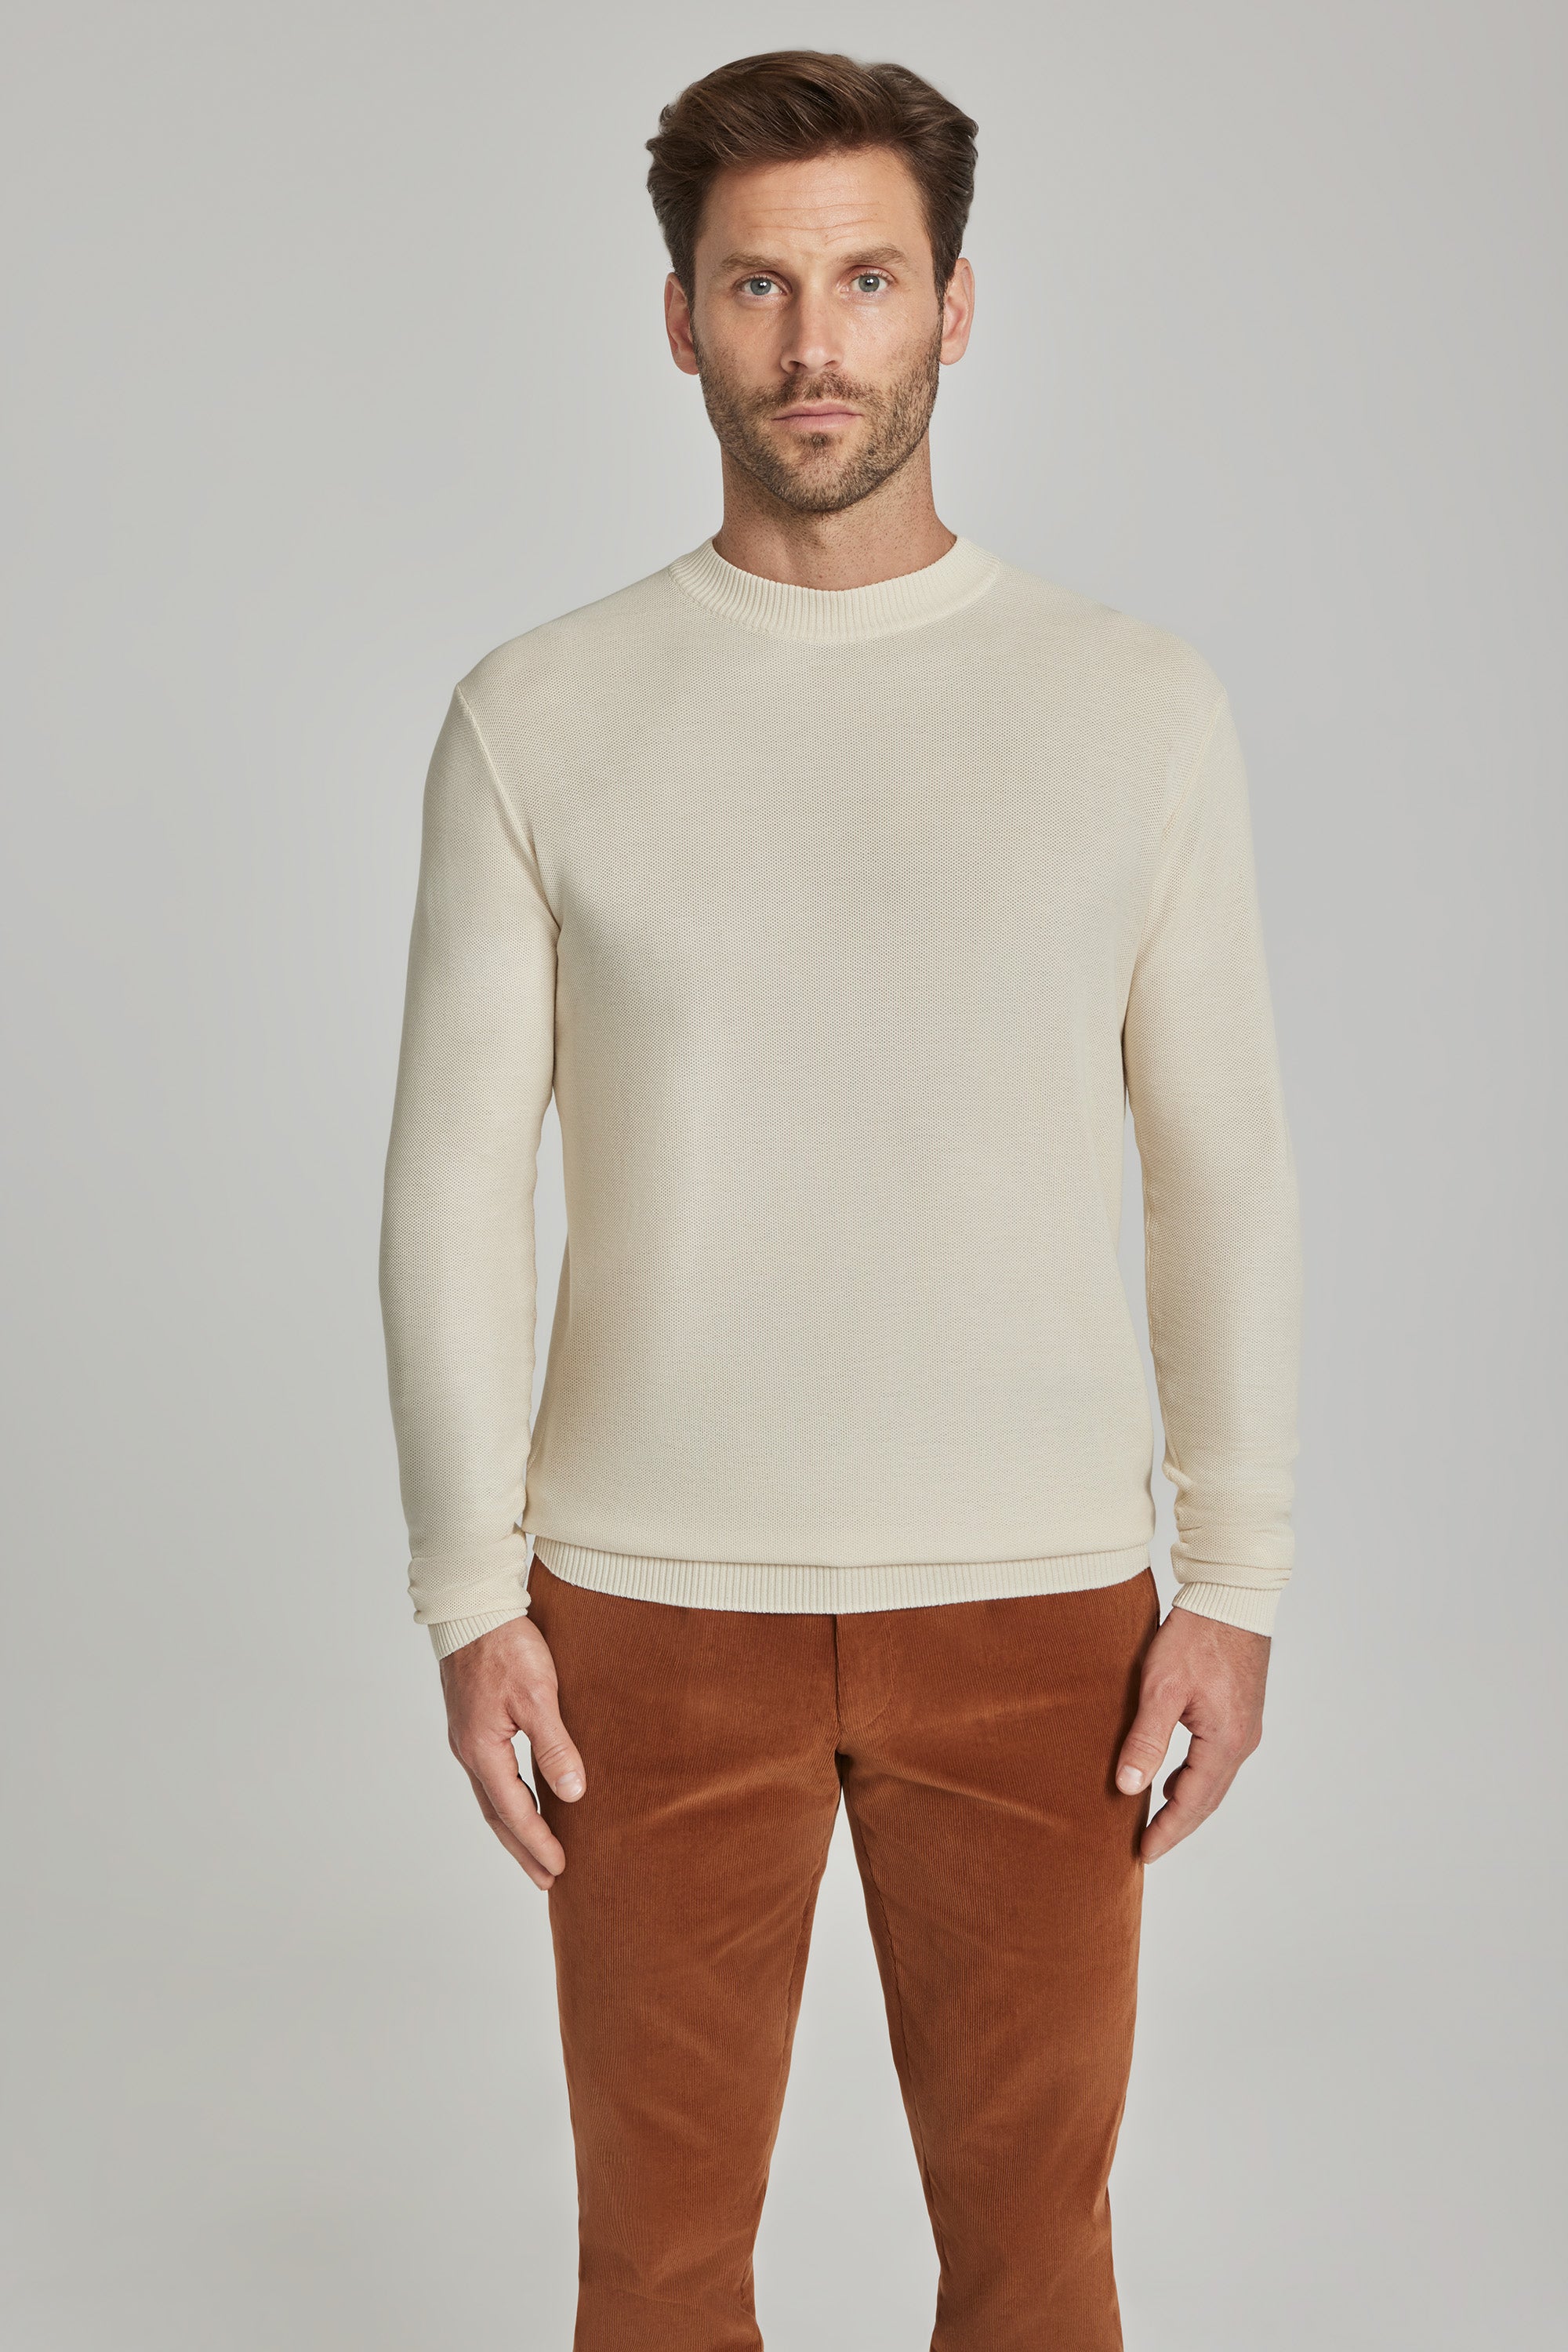 Alt view 1 Cadillac Solid Cotton and Silk Crew Neck in Ecru